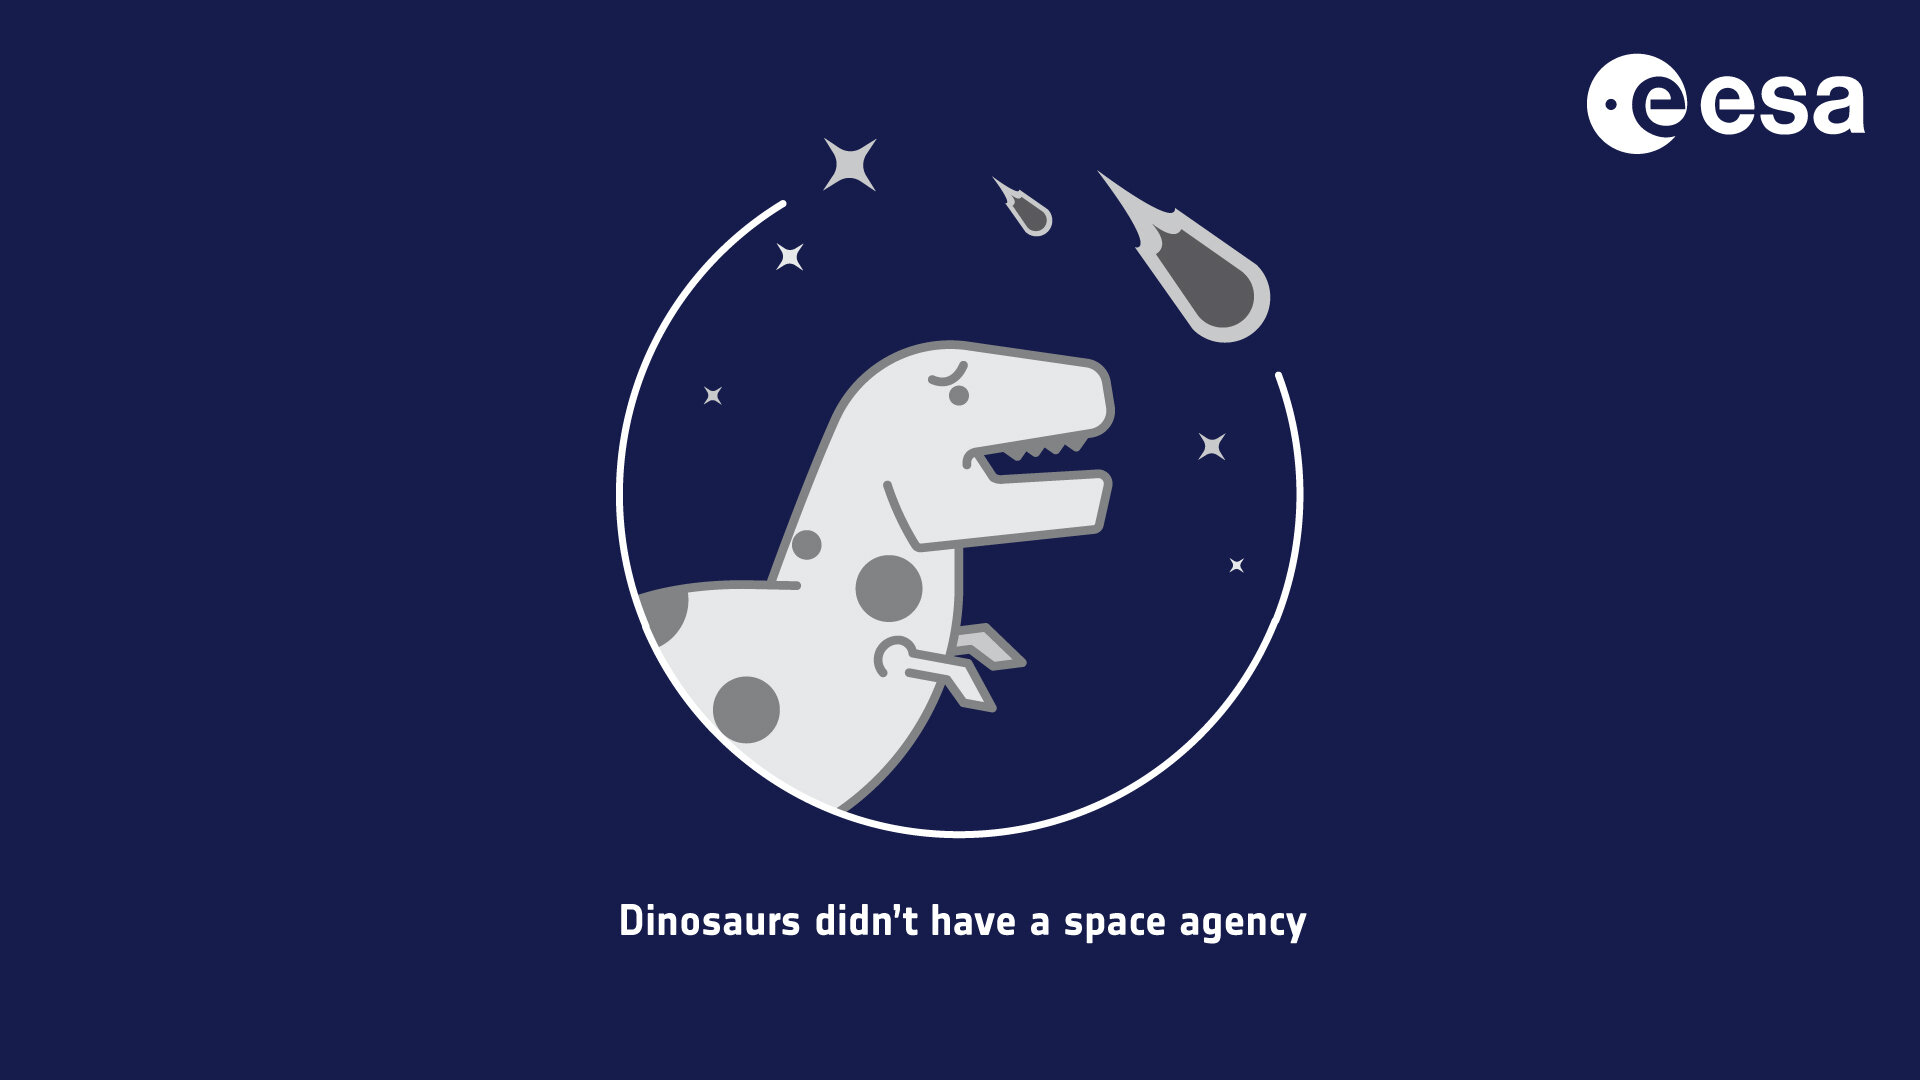 Dinosaurs didn't have a space agency